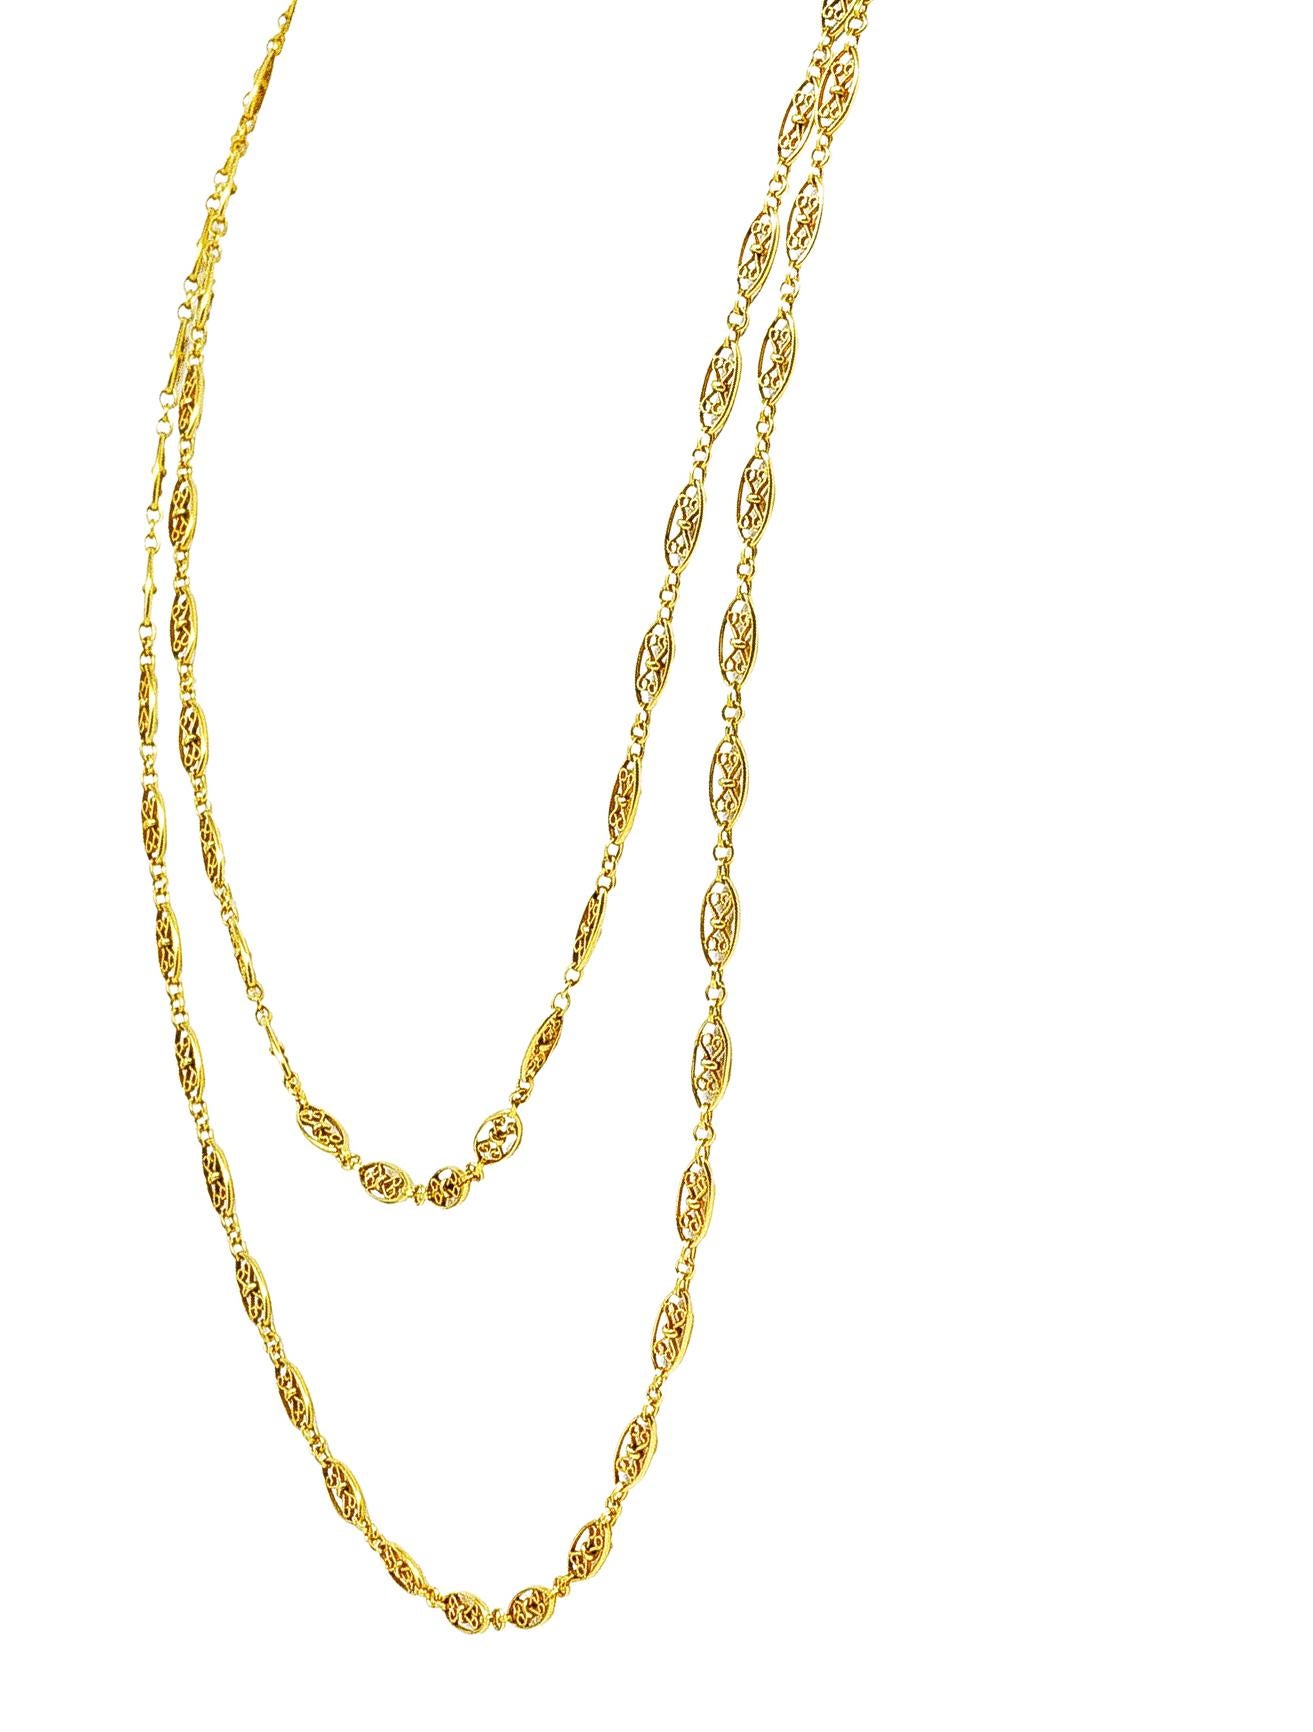 Women's or Men's French Victorian 18 Karat Yellow Gold Heart Chain Link Necklace